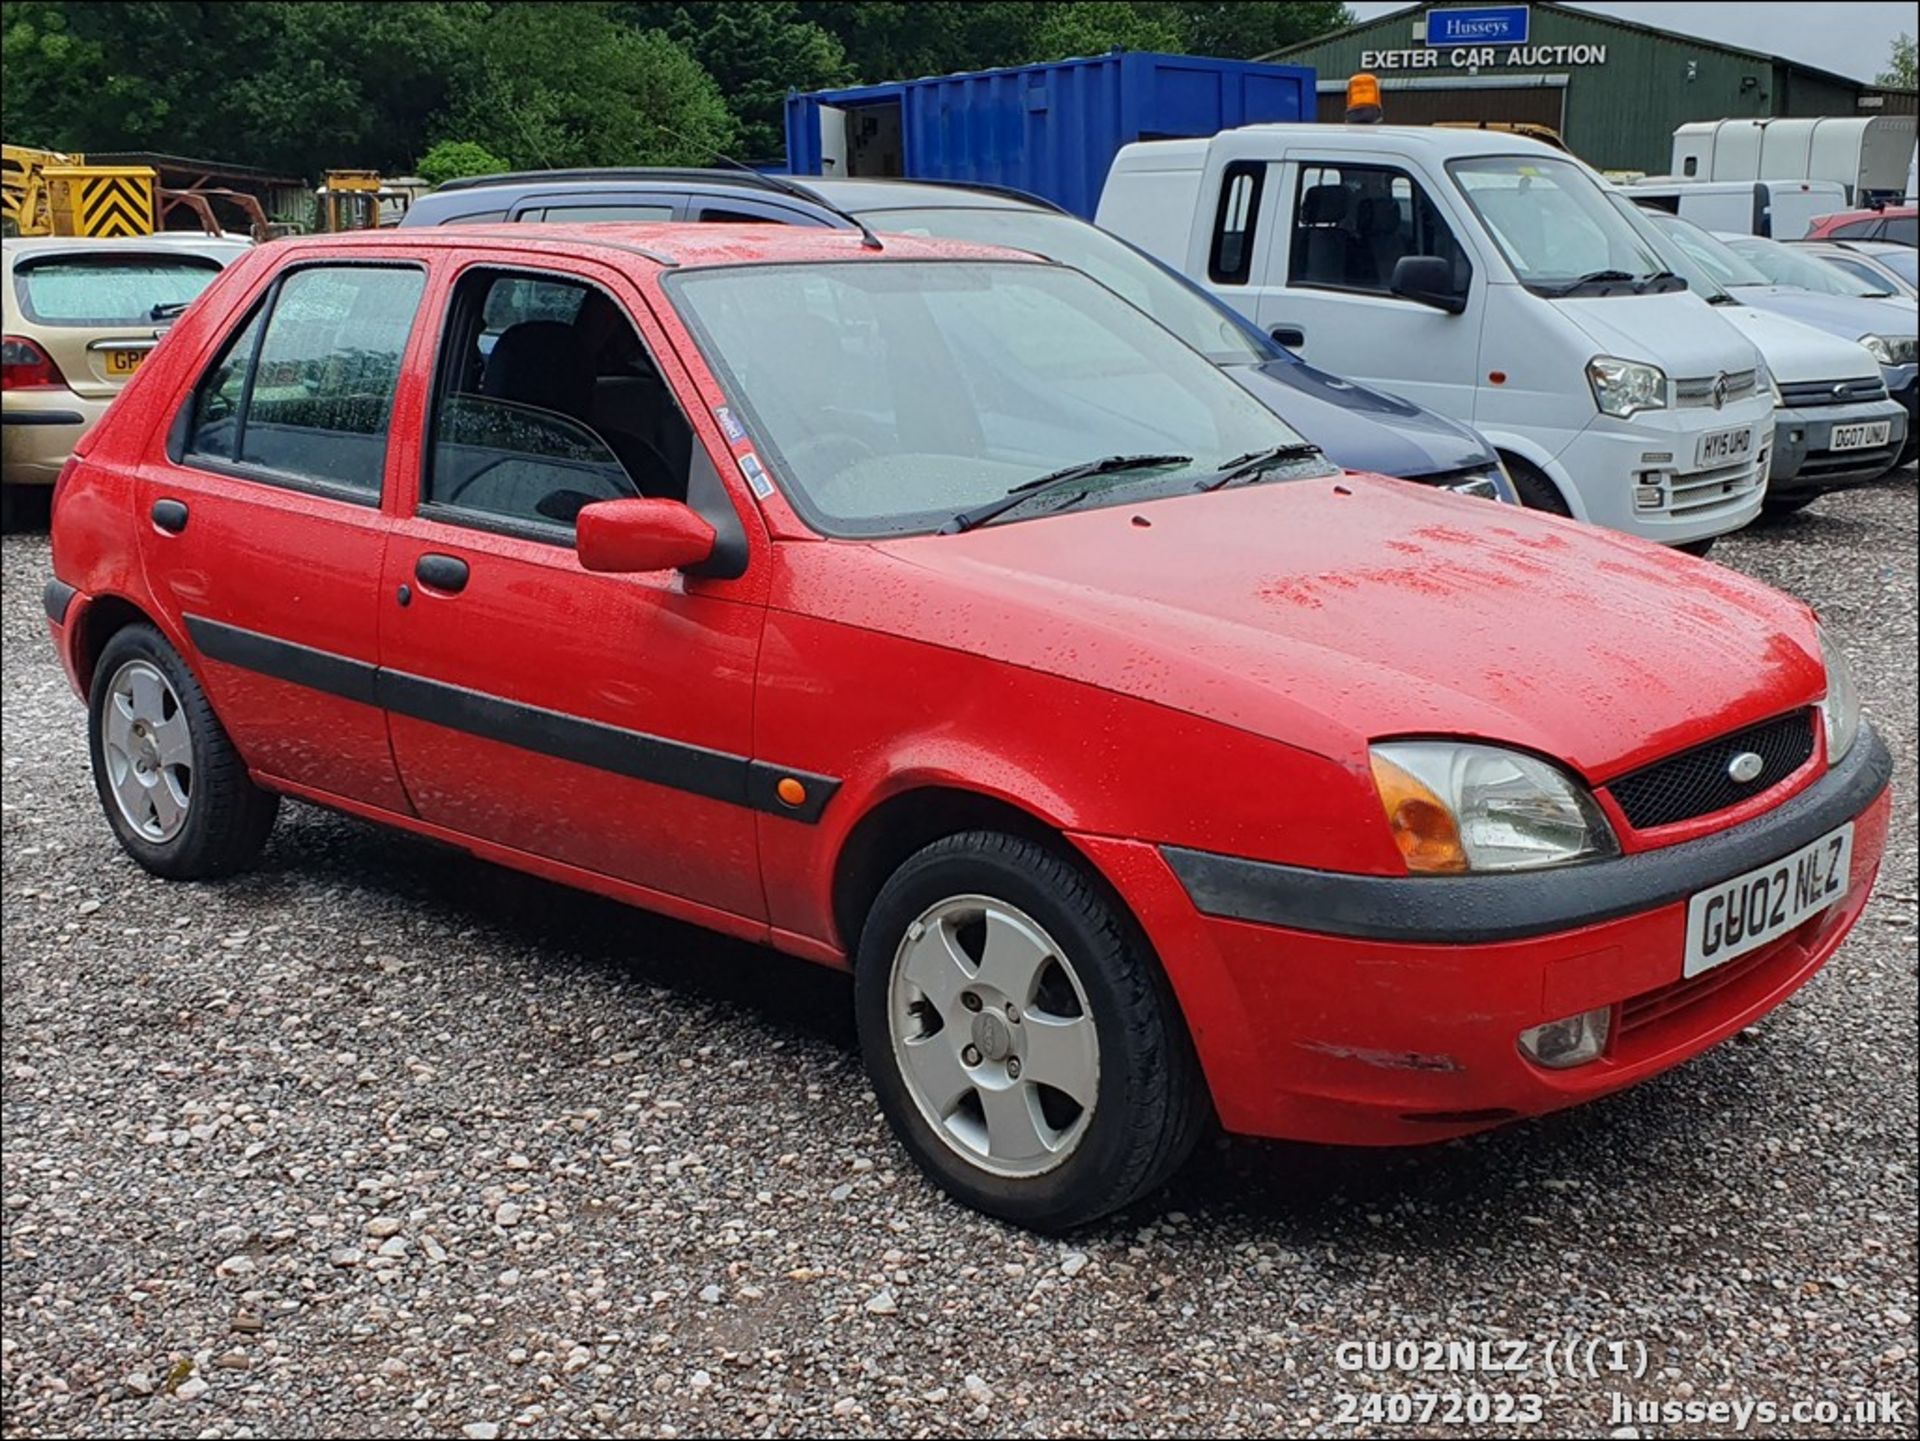 02/02 FORD FIESTA FREESTYLE - 1242cc 3dr Hatchback (Red)